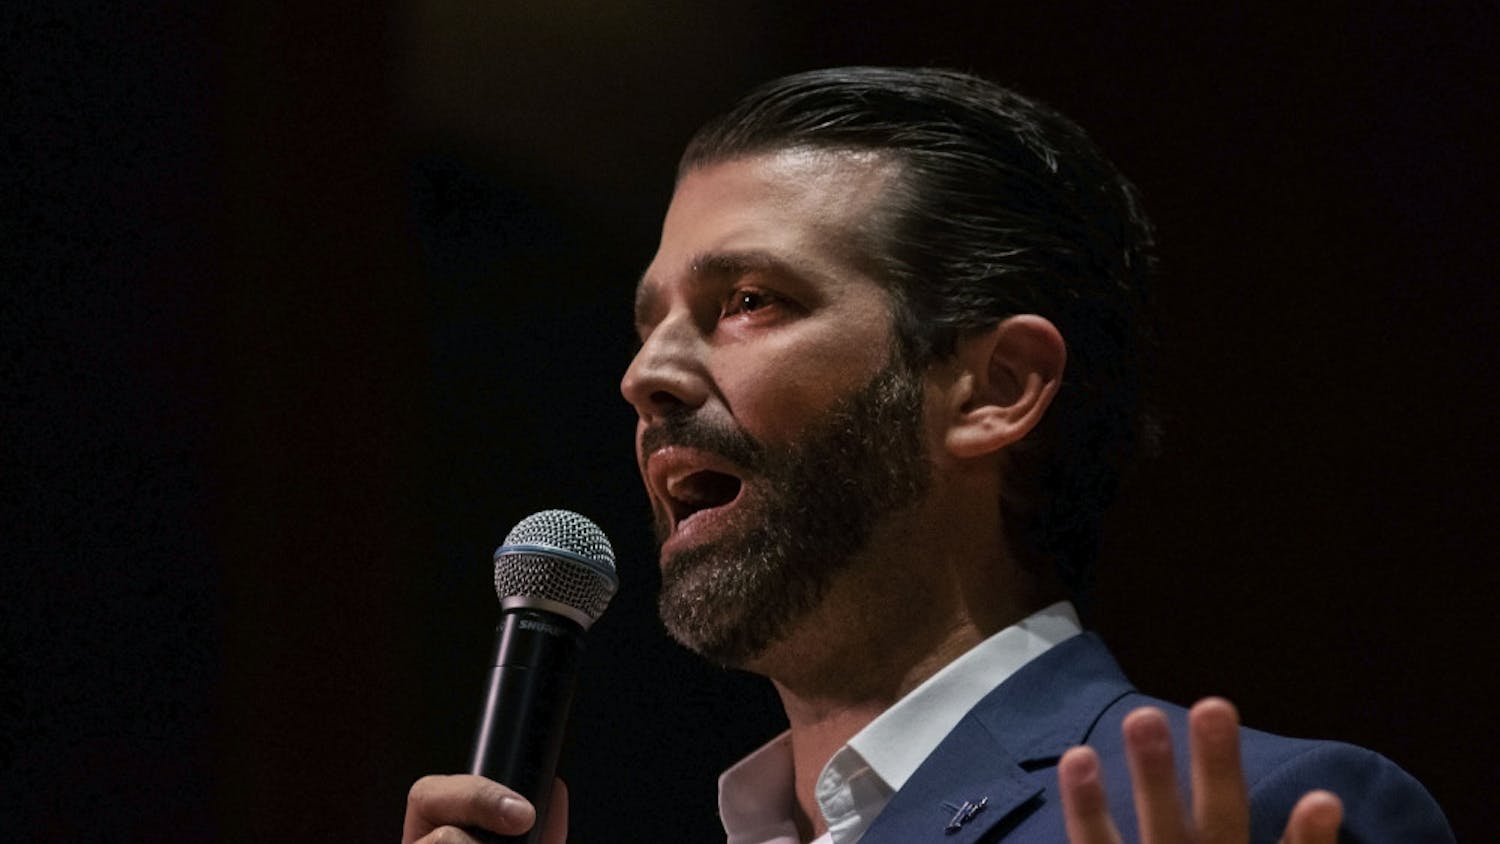 Donald Trump Jr. speaks to a crowd of more than 800 people on October 10, 2019. Trump’s speech was met with a mixture of cheers and boos.